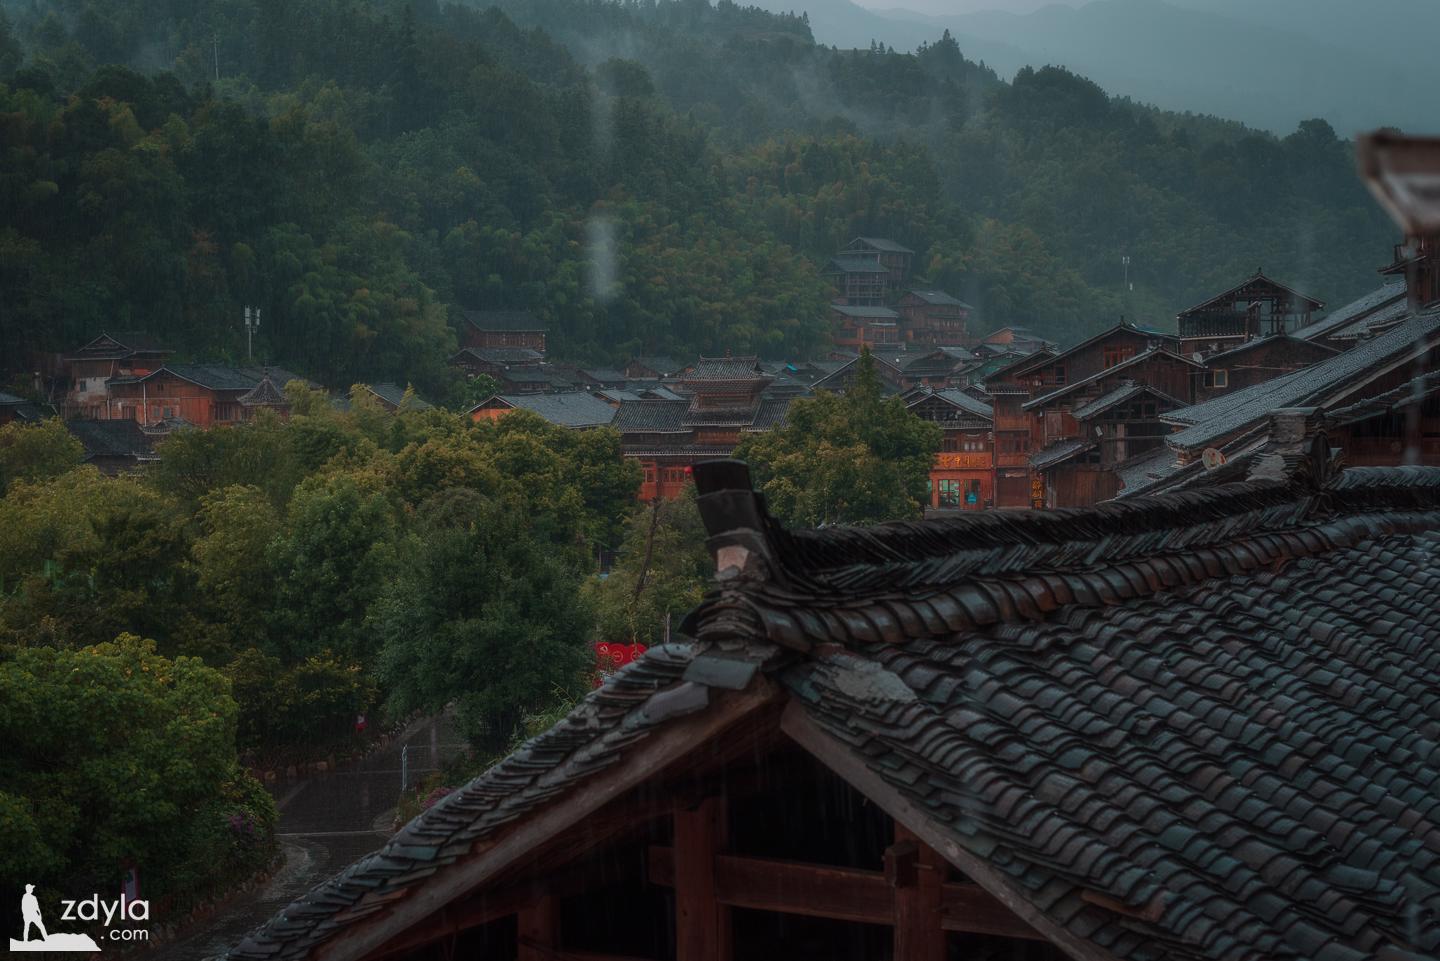 Dong village in the rain